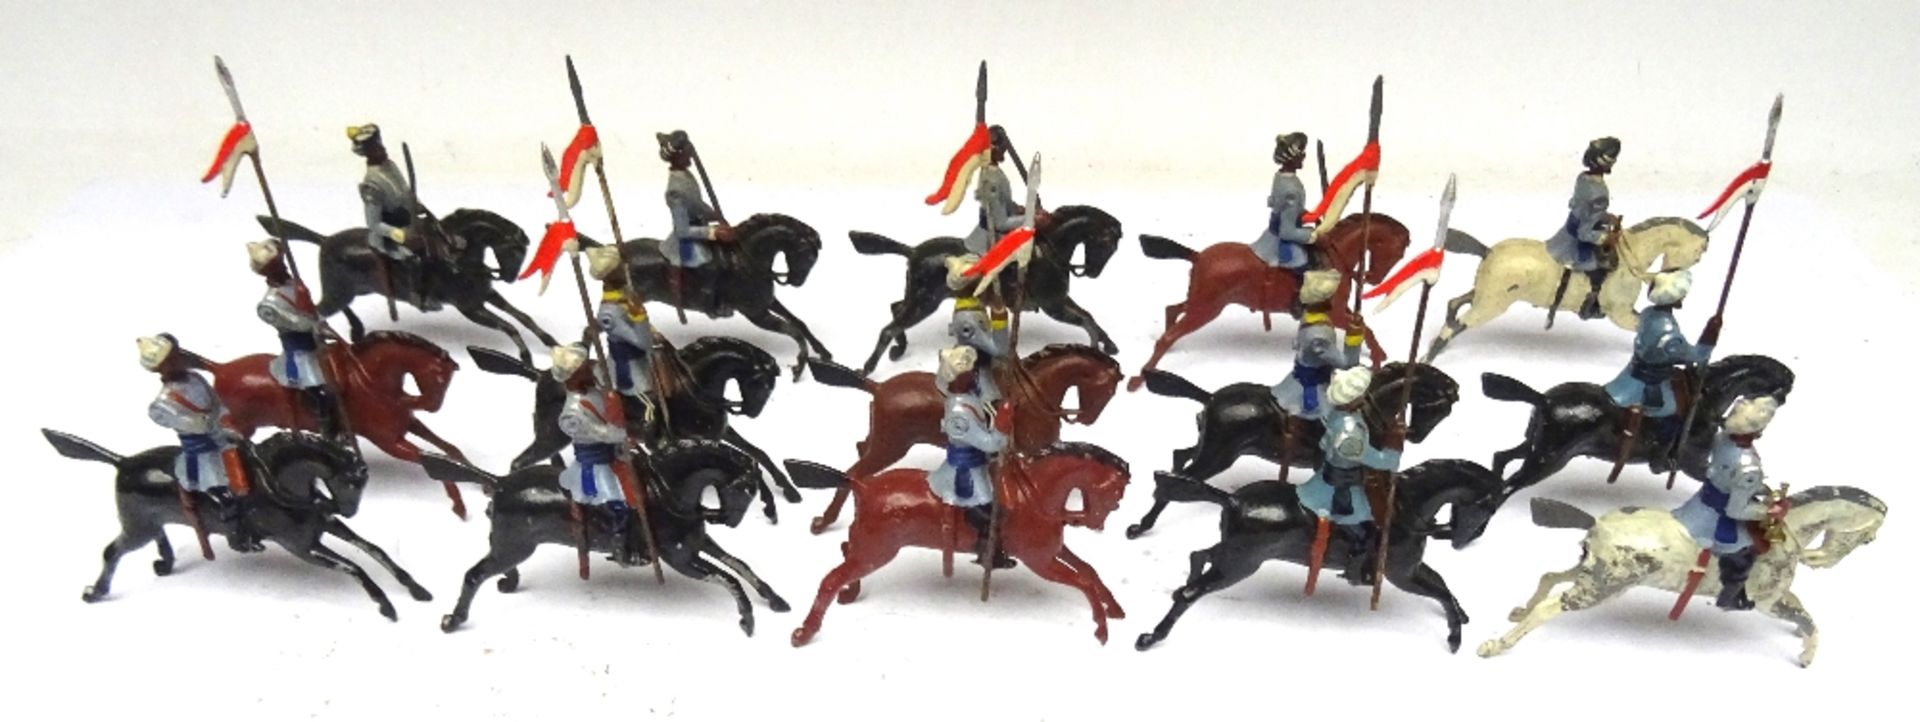 Britains from set 64, 2nd Madras Lancers - Image 2 of 6